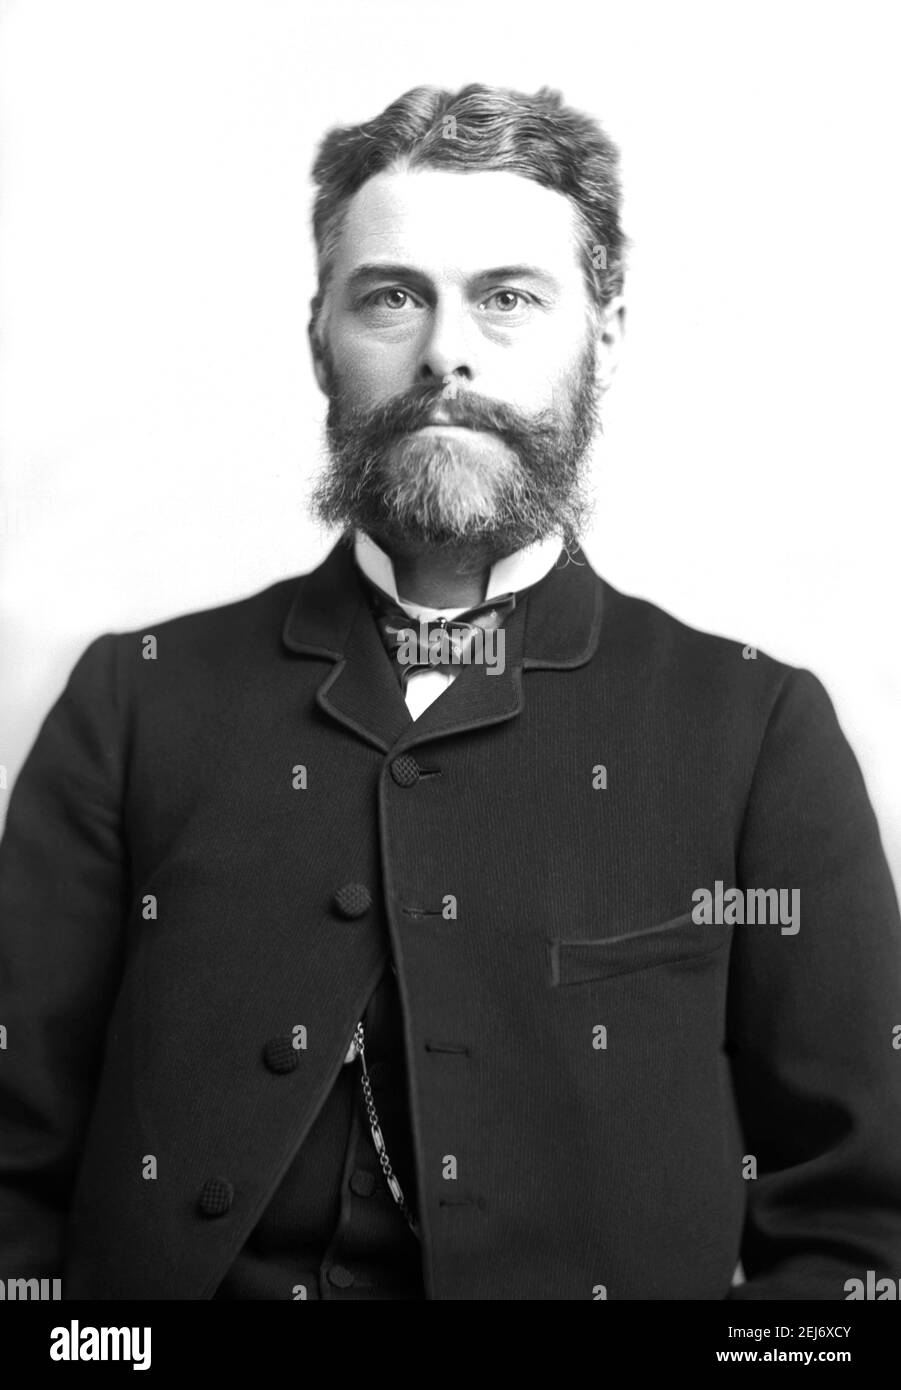 Edward Drinker Cope (1840–1897), American paleontologist, zoologist, and herpetologist. Cope is perhaps best remembered for a personal feud with paleontologist Othniel Charles Marsh which led to a period of intense fossil-finding competition now known as the Bone Wars. (Photo: 1880) Stock Photo